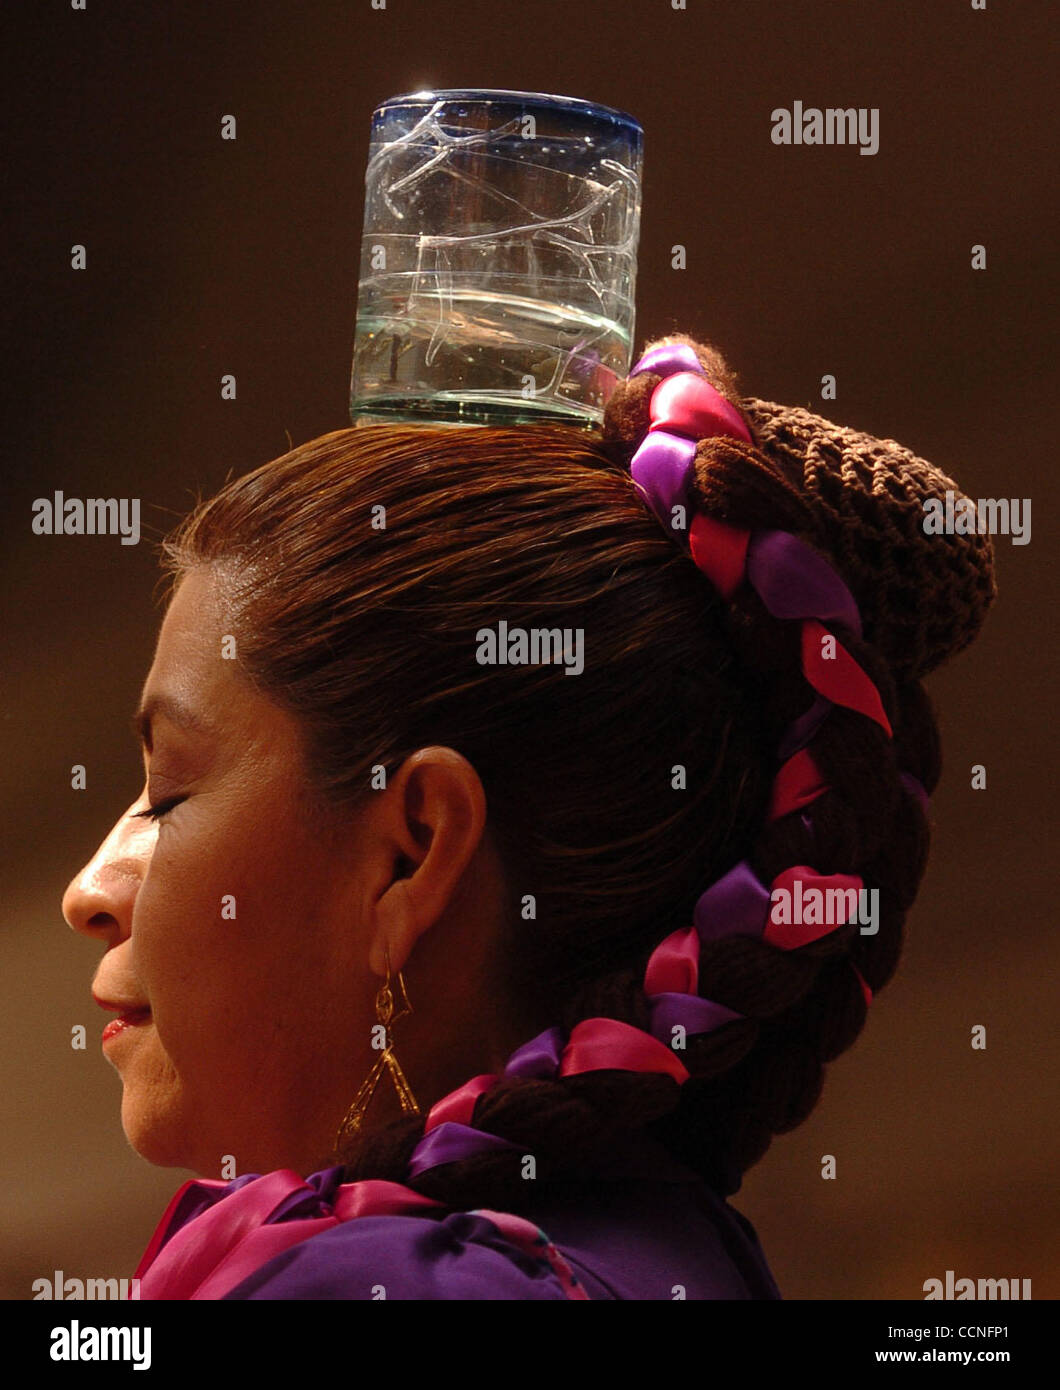 Marisela Castaneda, from Antioch, balances a glass of water on her head as she dances with members of the ballet folklorico group Olin de Contra Costa during a performance for the National Hispanic Heritage Month festivities at the Somersville Town Center on Sunday, October 3, 2004 in Antioch, Calif Stock Photo